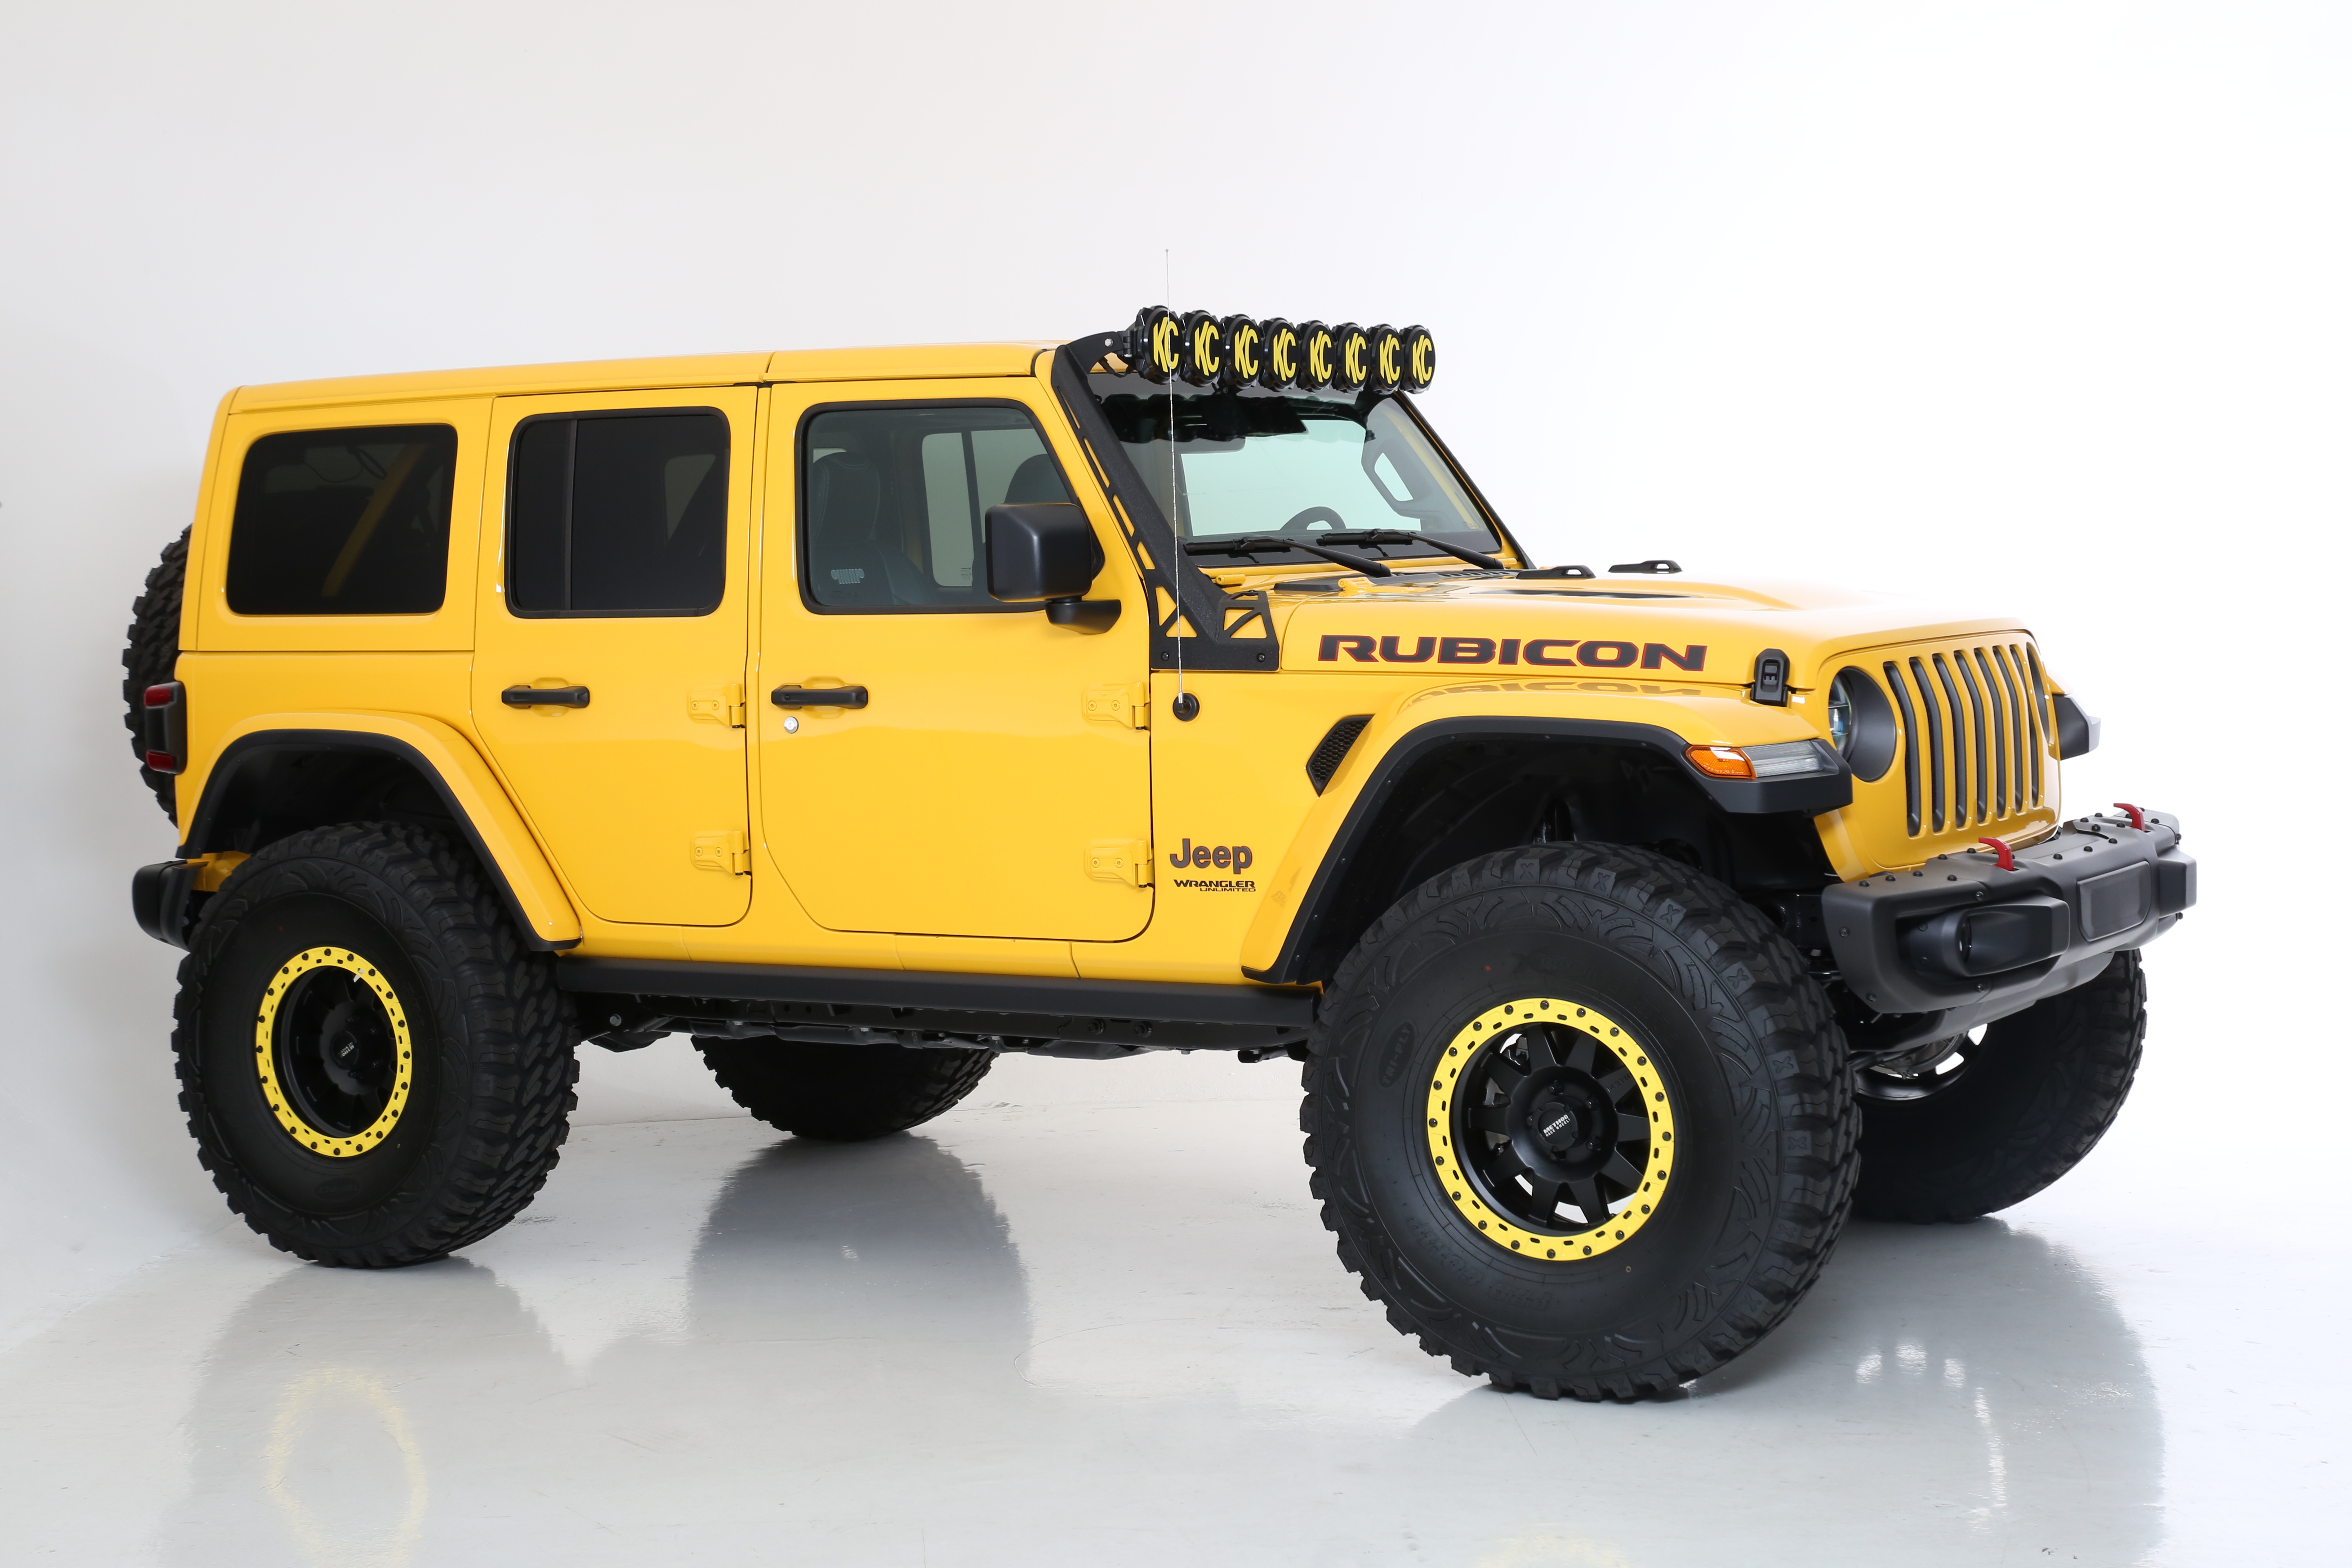 lifted JK Wrangler 2014 Dune color with Atlas bumpers from DSI